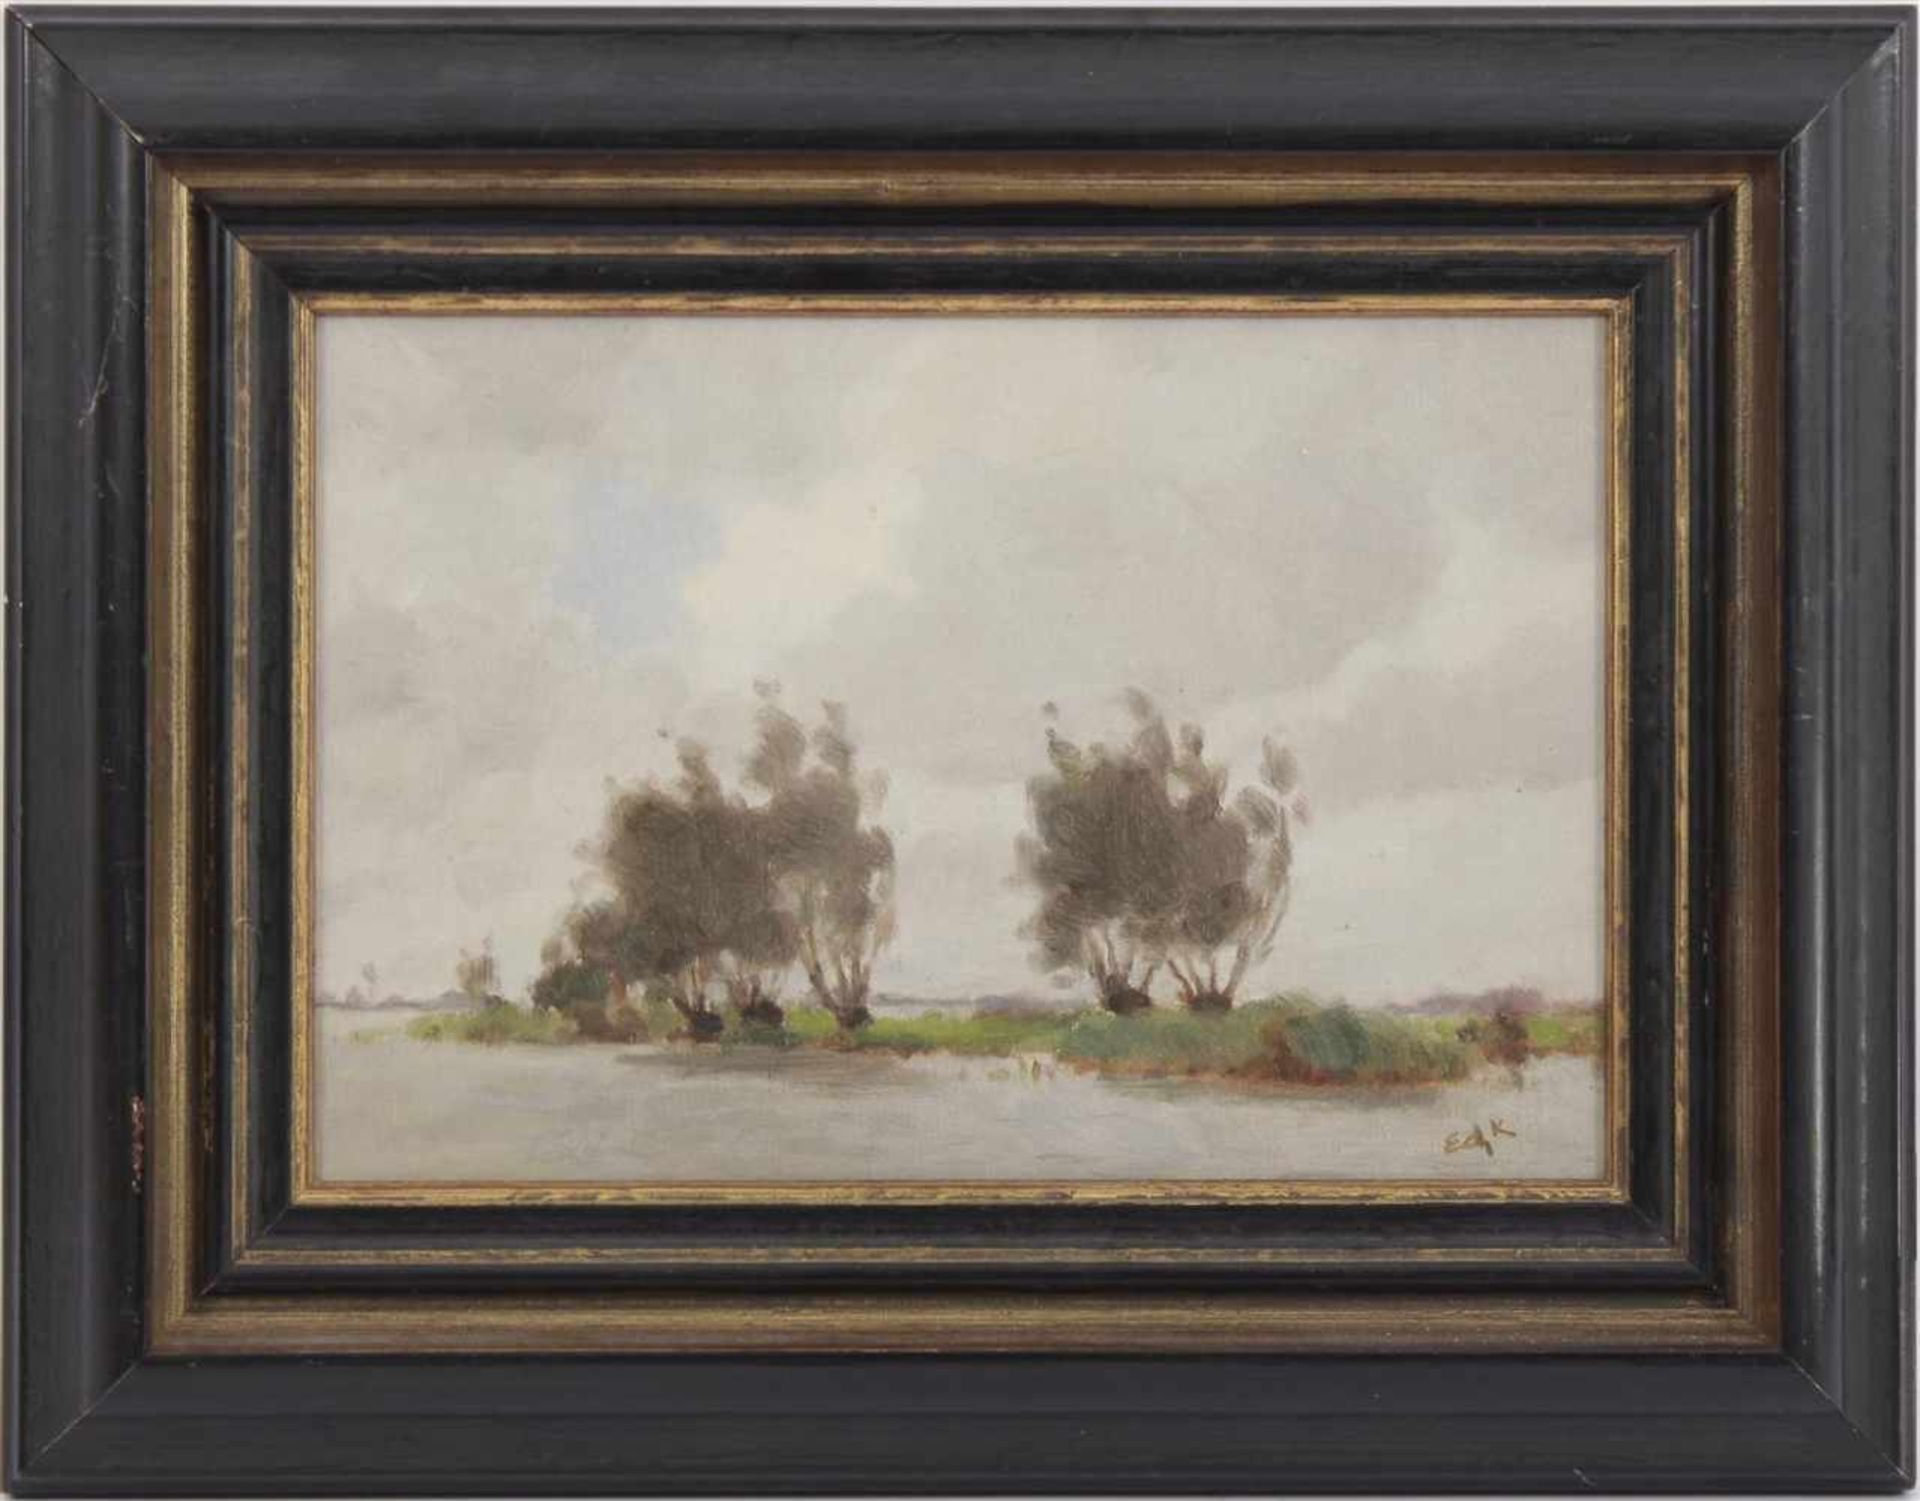 Signed Ed K, Polder landscape with willow trees, panel 20x29 cm